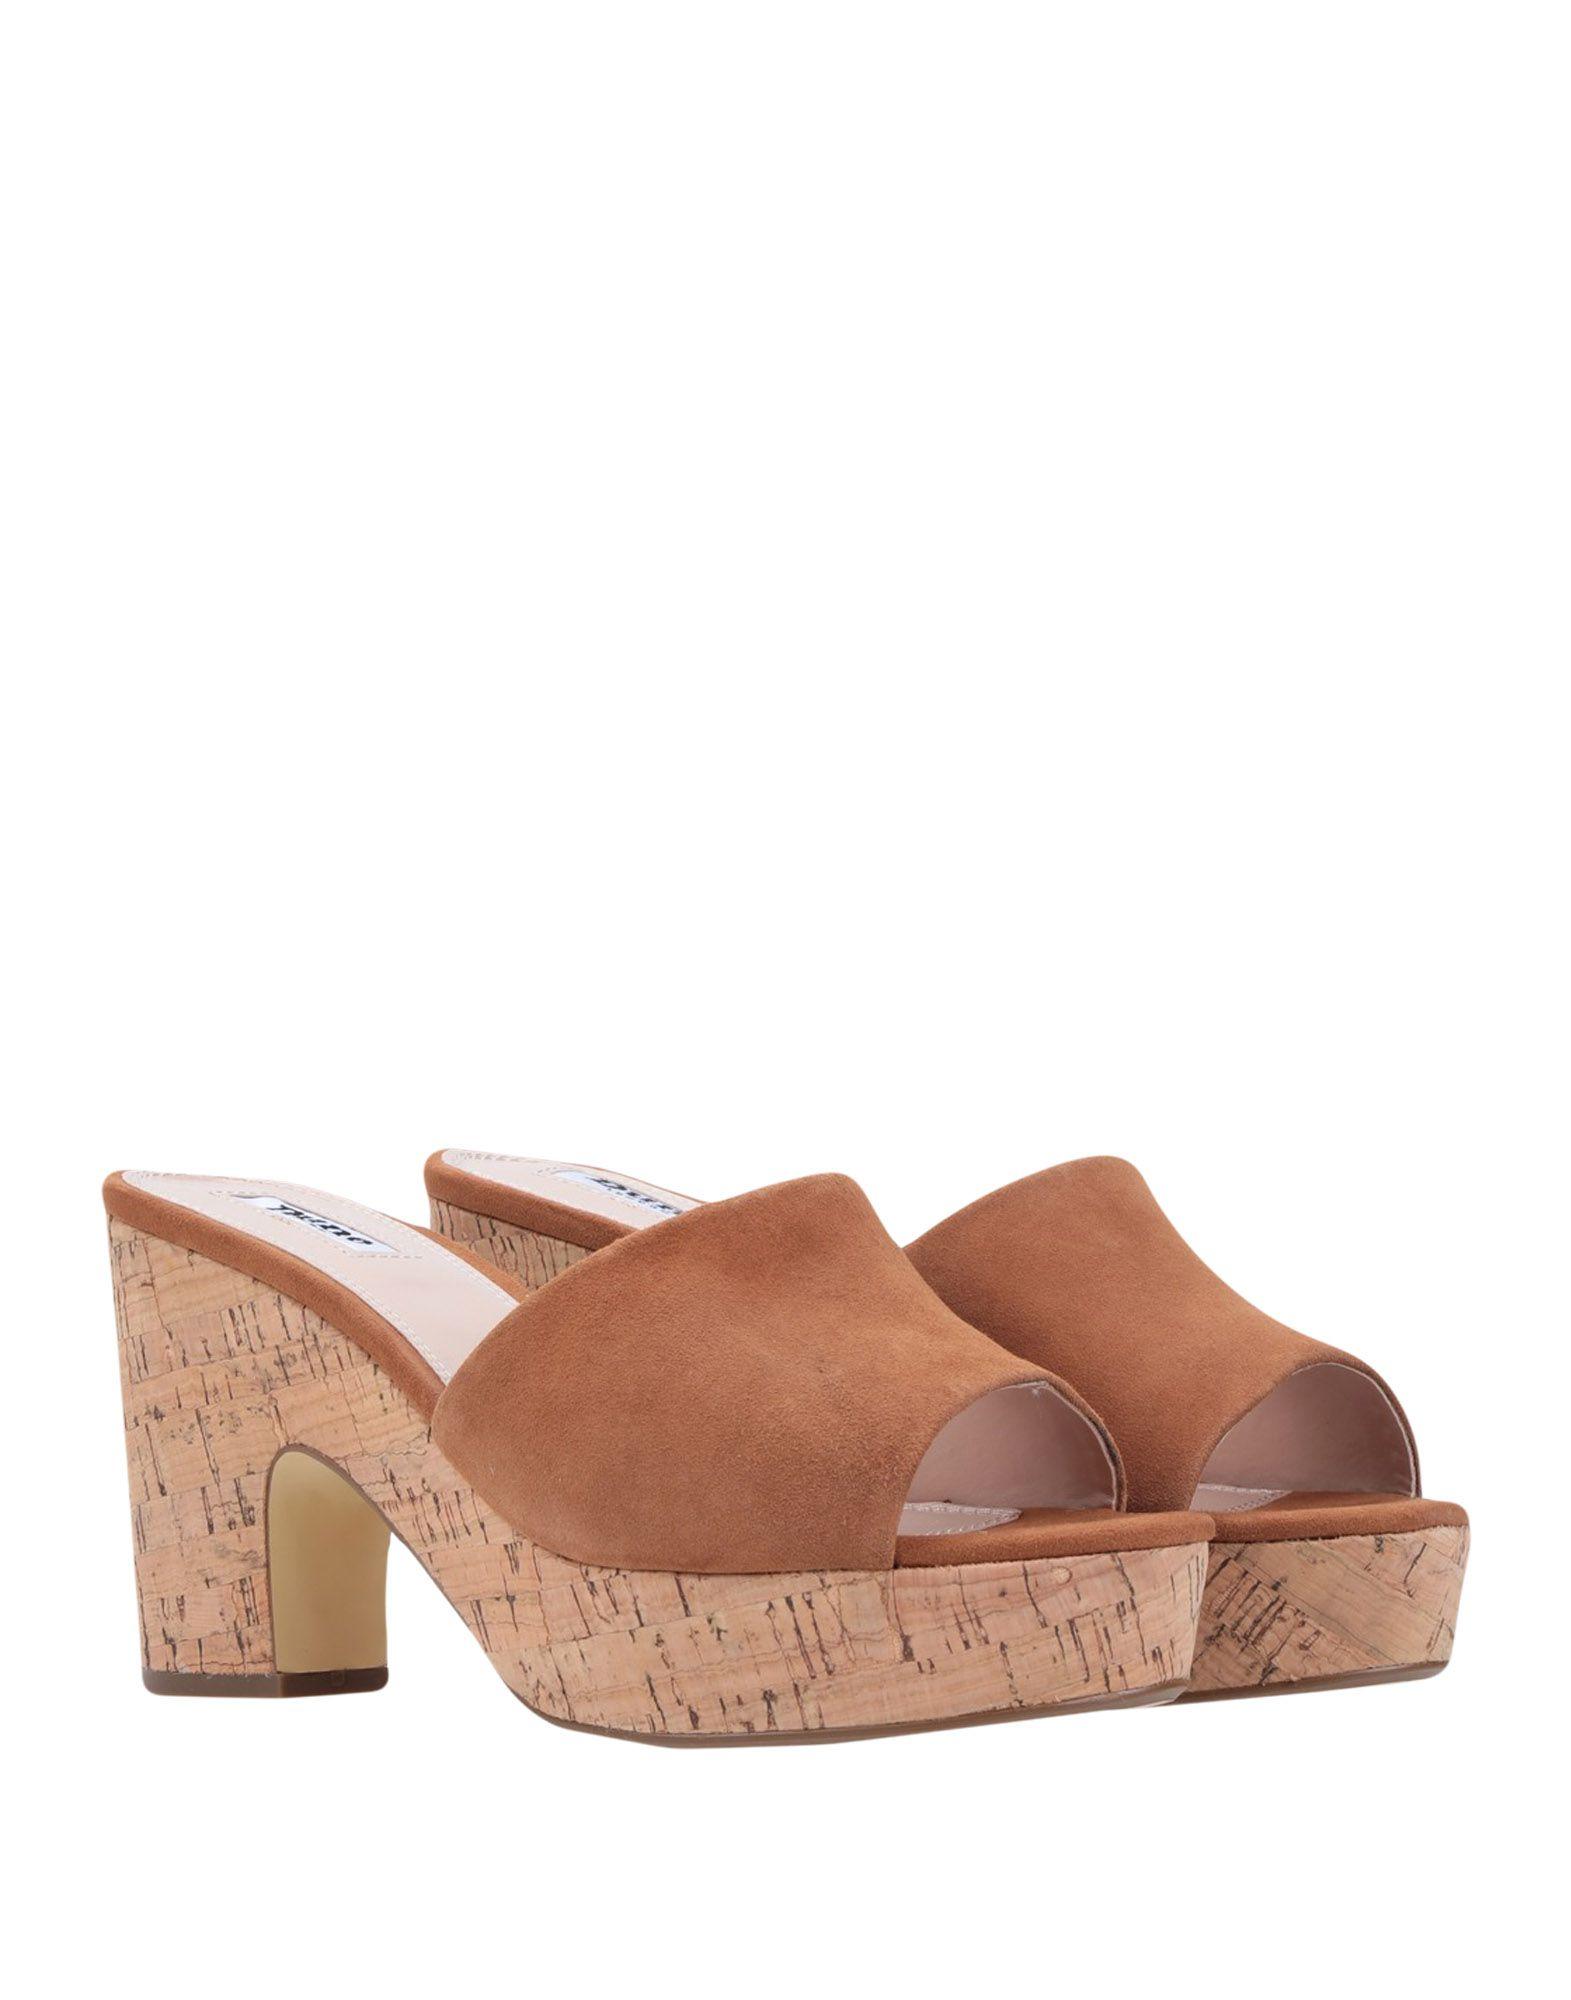 Dune Suede Mules in Camel (Brown) - Lyst